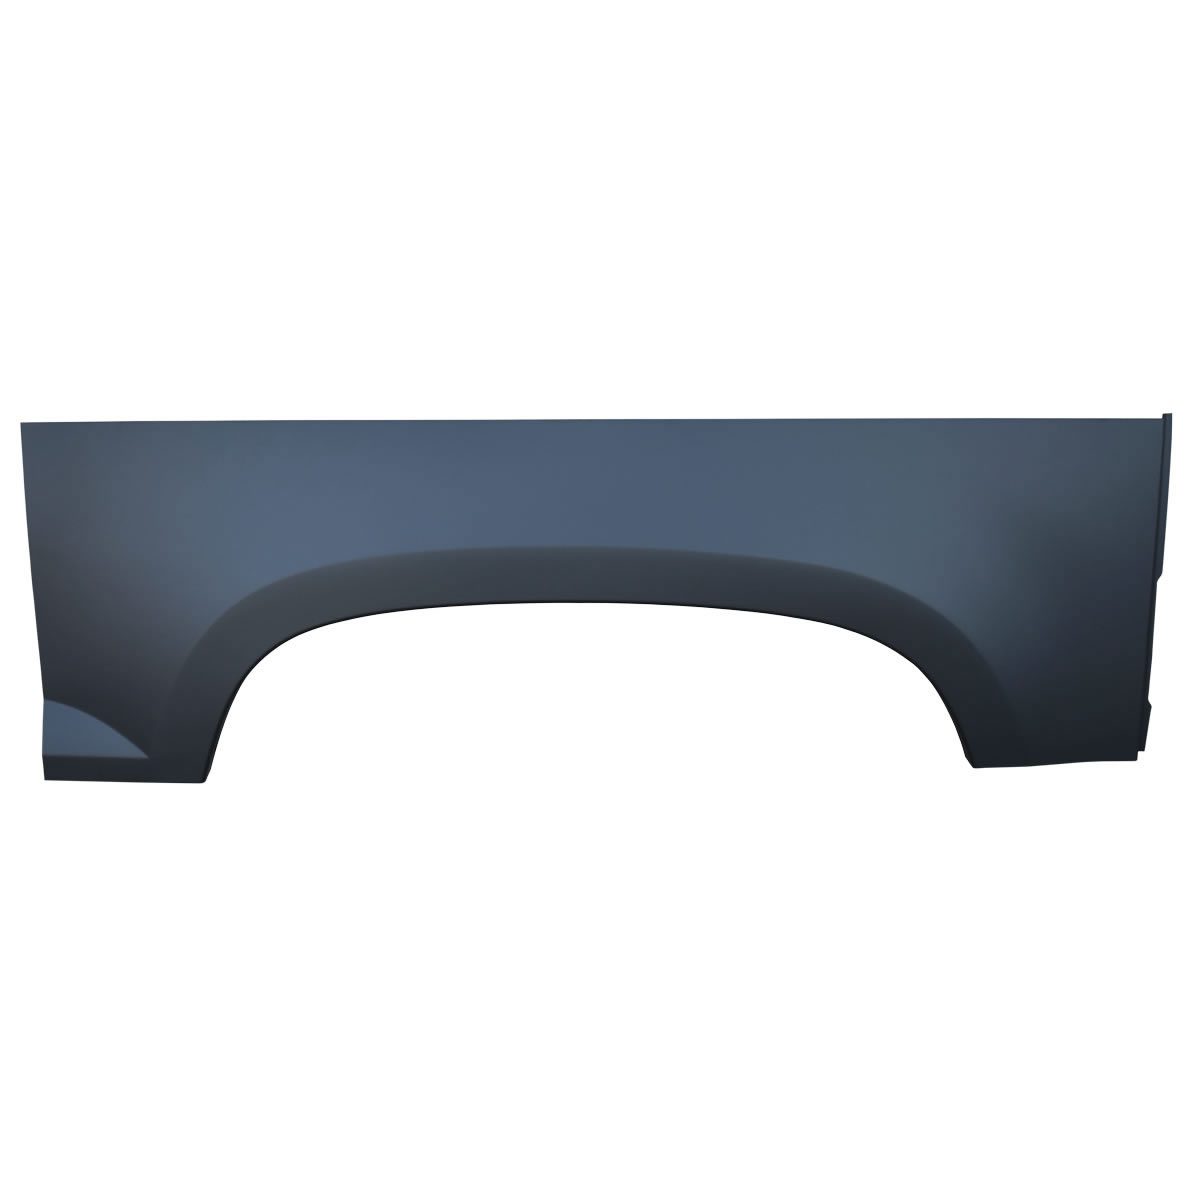 2007-2013 Chevy Avalanche and Cadillac Escalade EXT Upper Rear Wheel Arch, Passenger Side